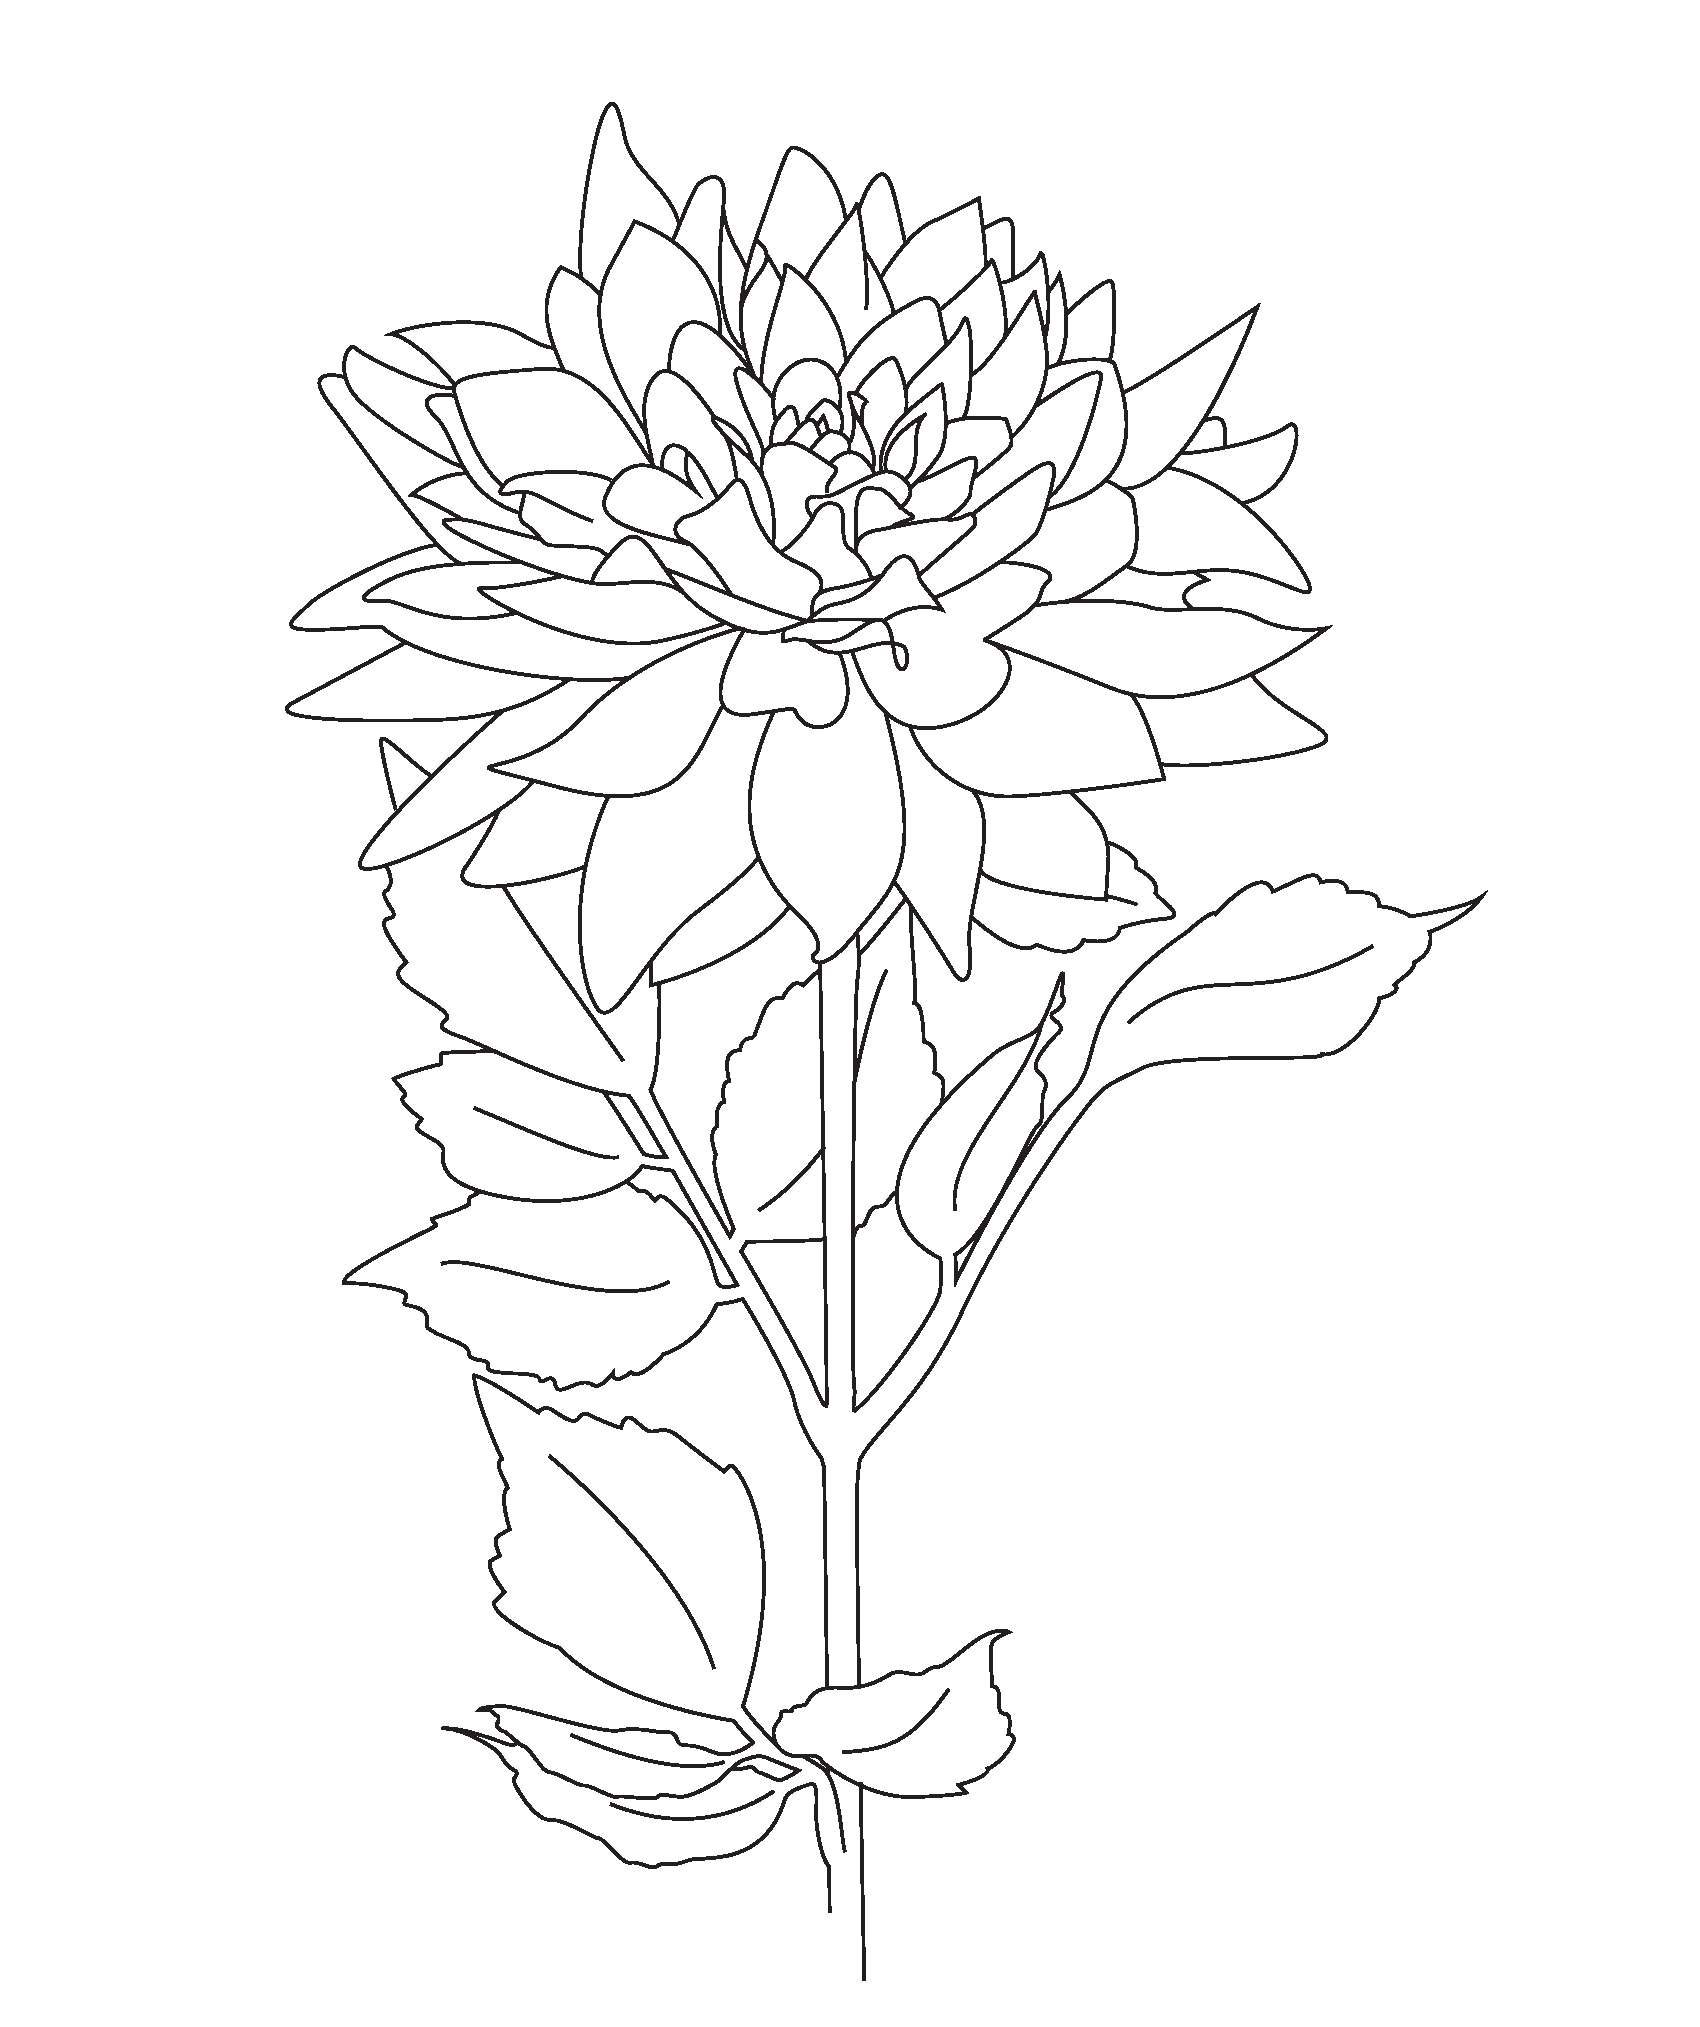 Bloom And Color  Celebrate Nature s Beauty With Botanical Coloring Pages Mockup Free Botany Coloring Pages  Download Free Botany Coloring Pages Png Images  Free Cliparts On